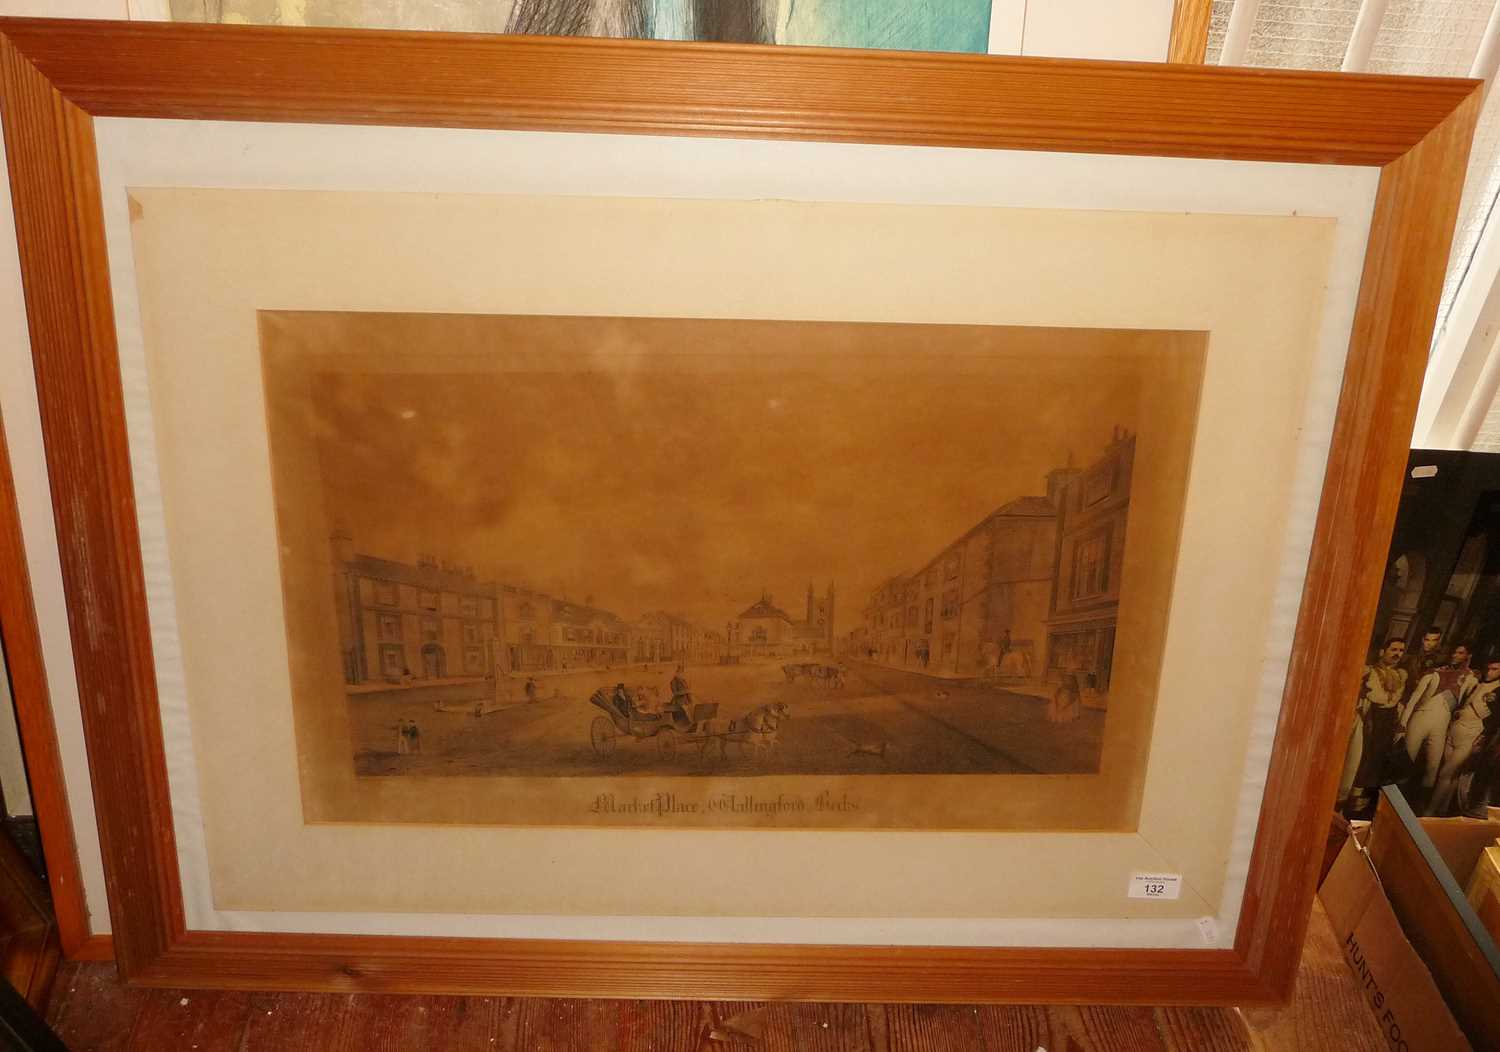 Large 19th c. engraving of Market Place, Wallingford